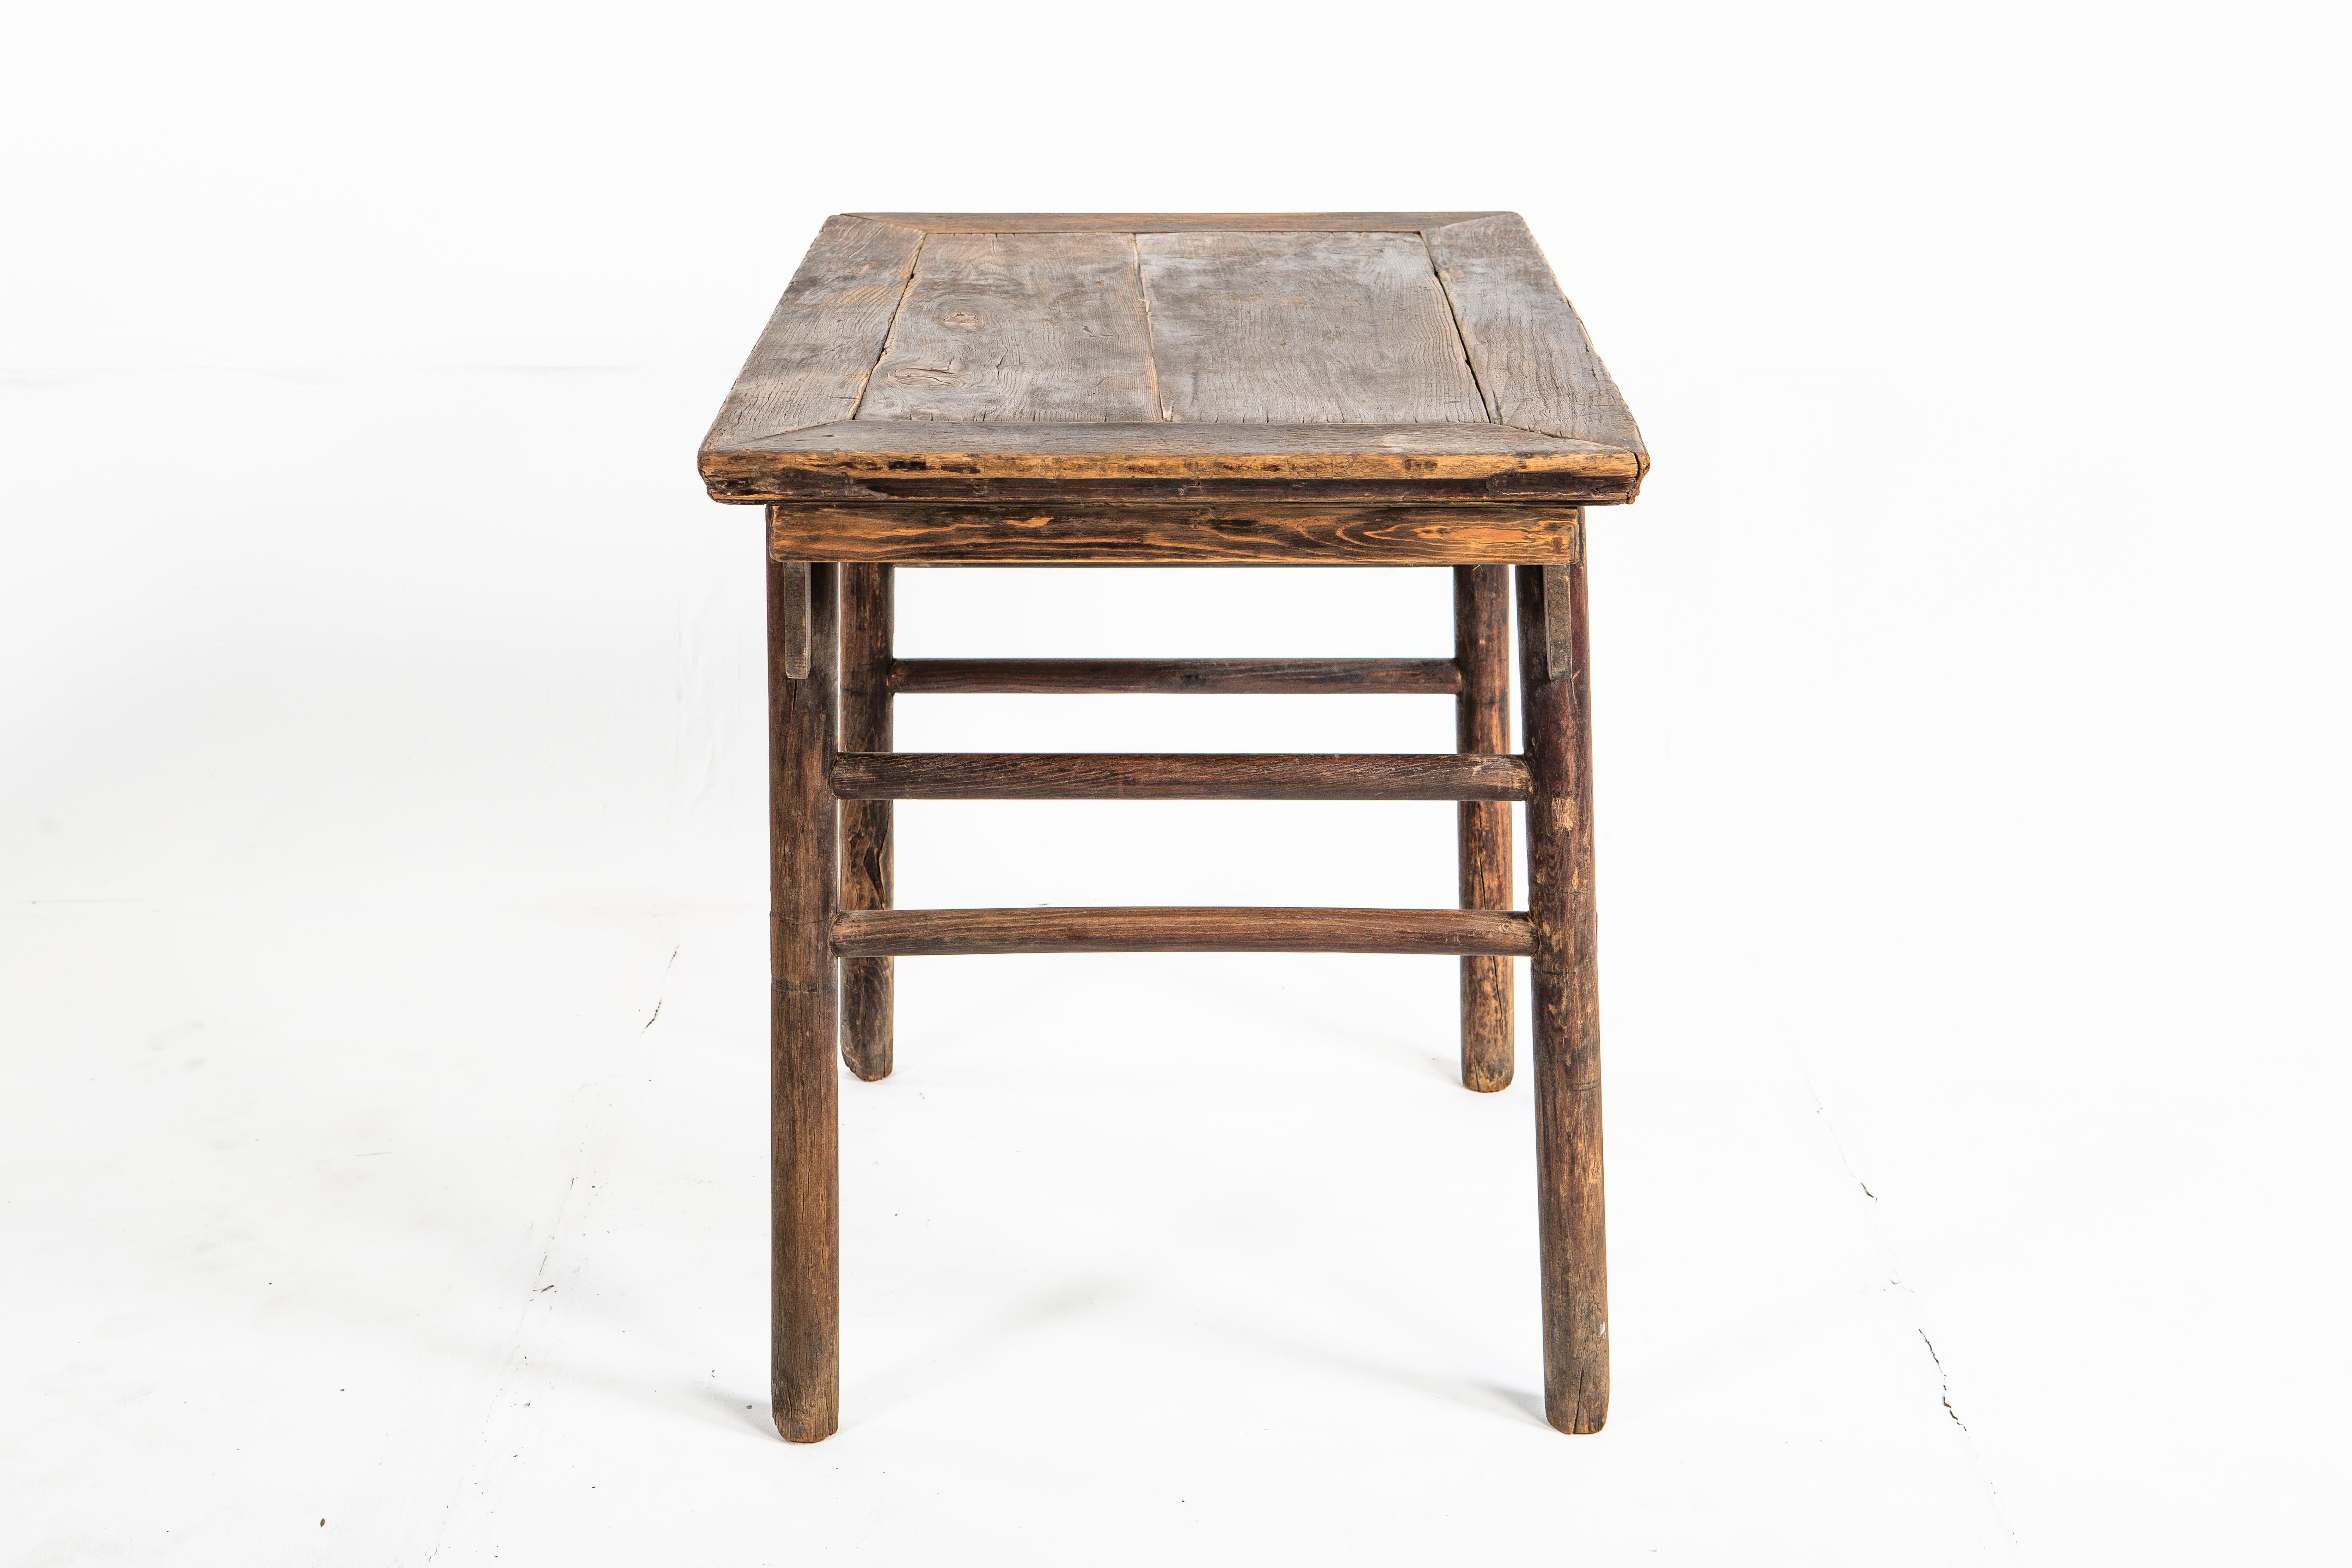 Early Qing Dynasty Painting Table (18. Jahrhundert und früher)